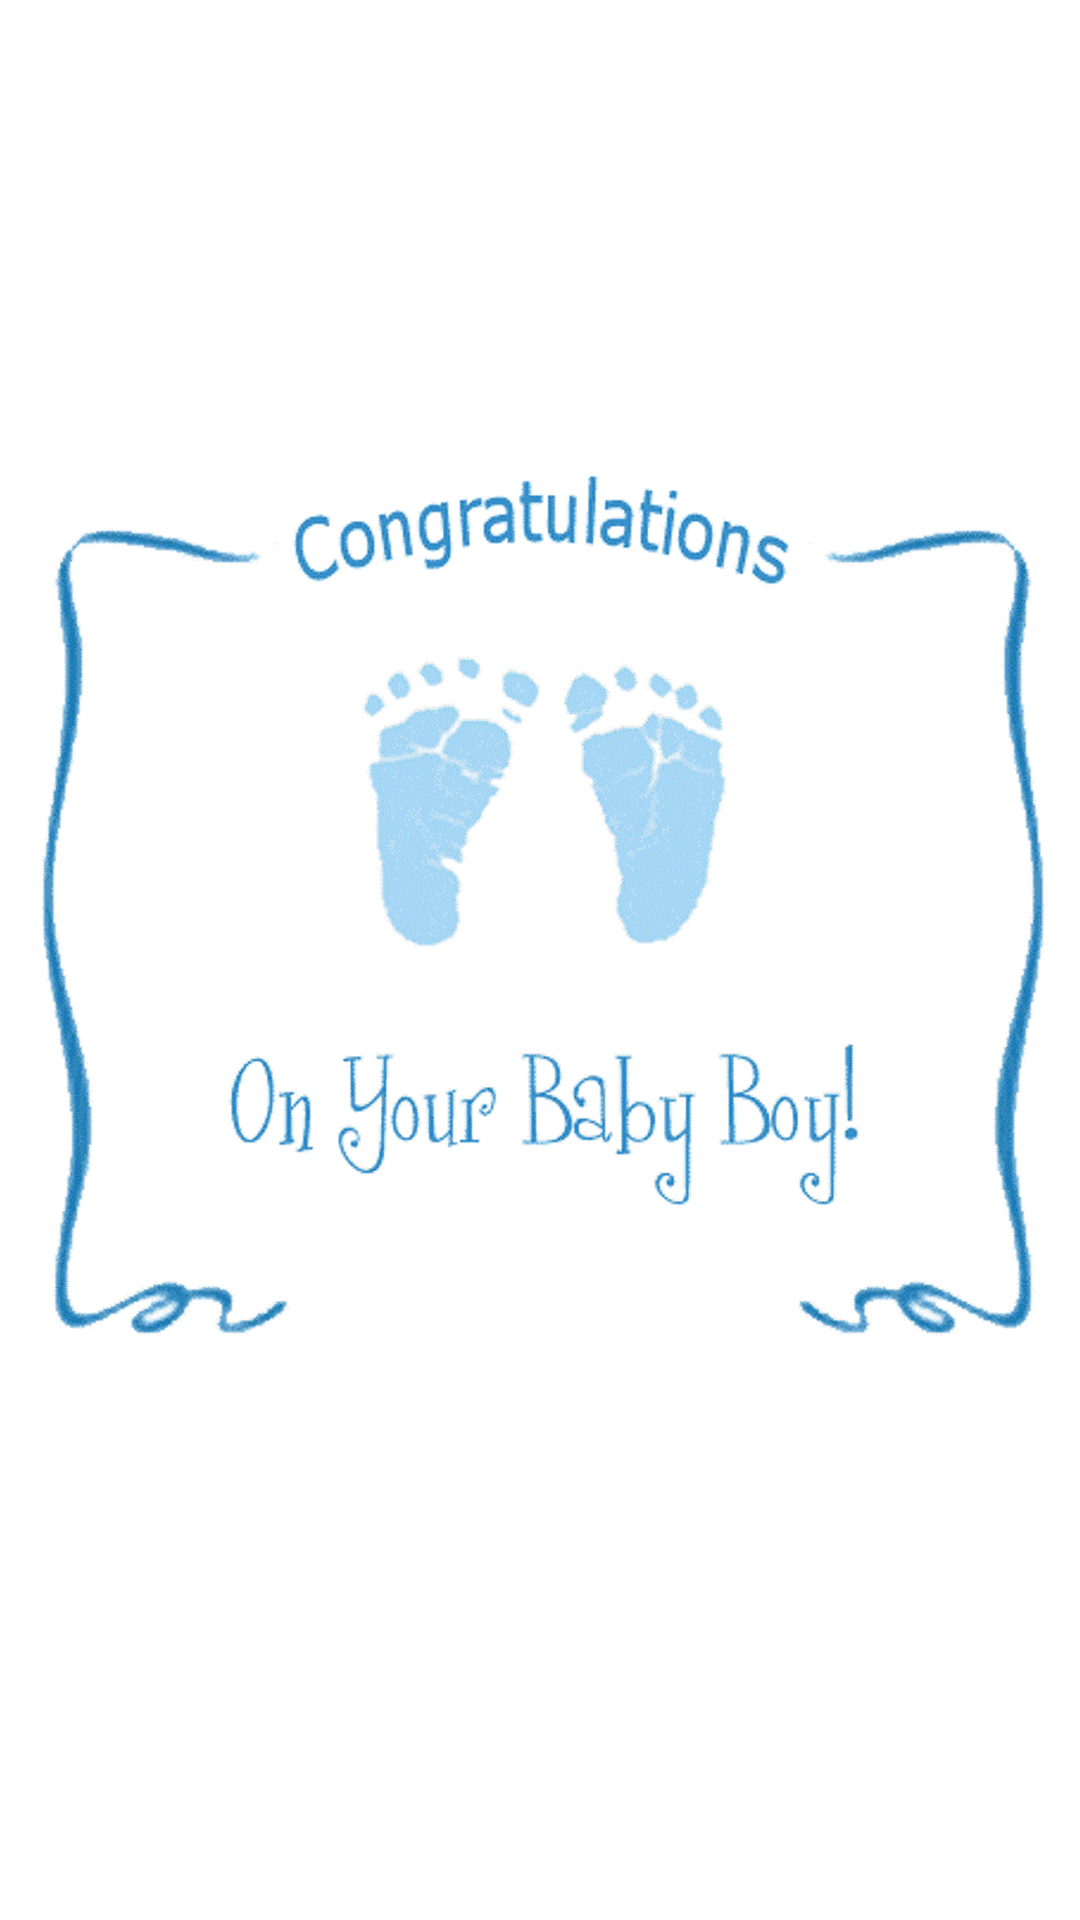 congratulations-baby-card-for-boy-hd-wallpapers-wallpapers-download